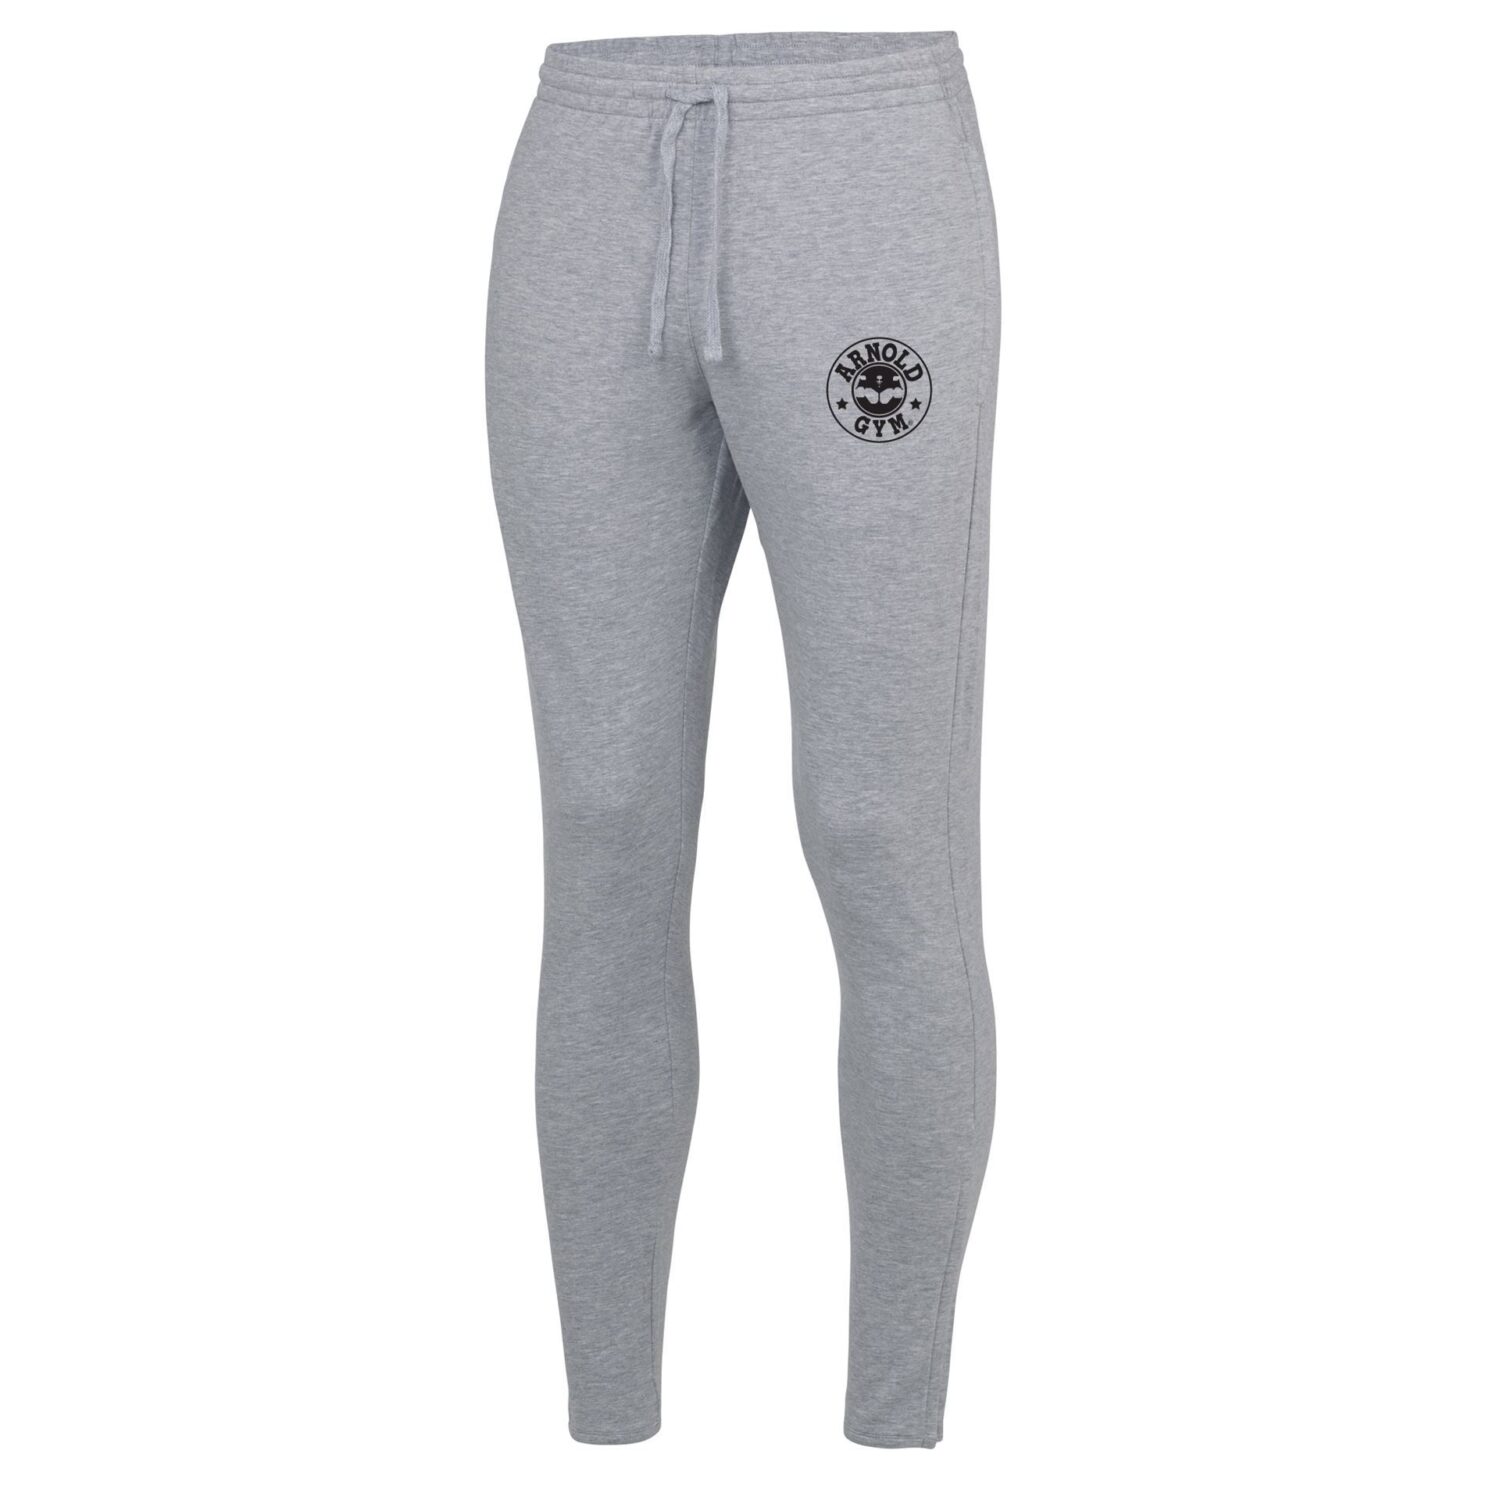 Men's Fitness Gym Joggers | Arnold Gym Workout Pants | Training Wear